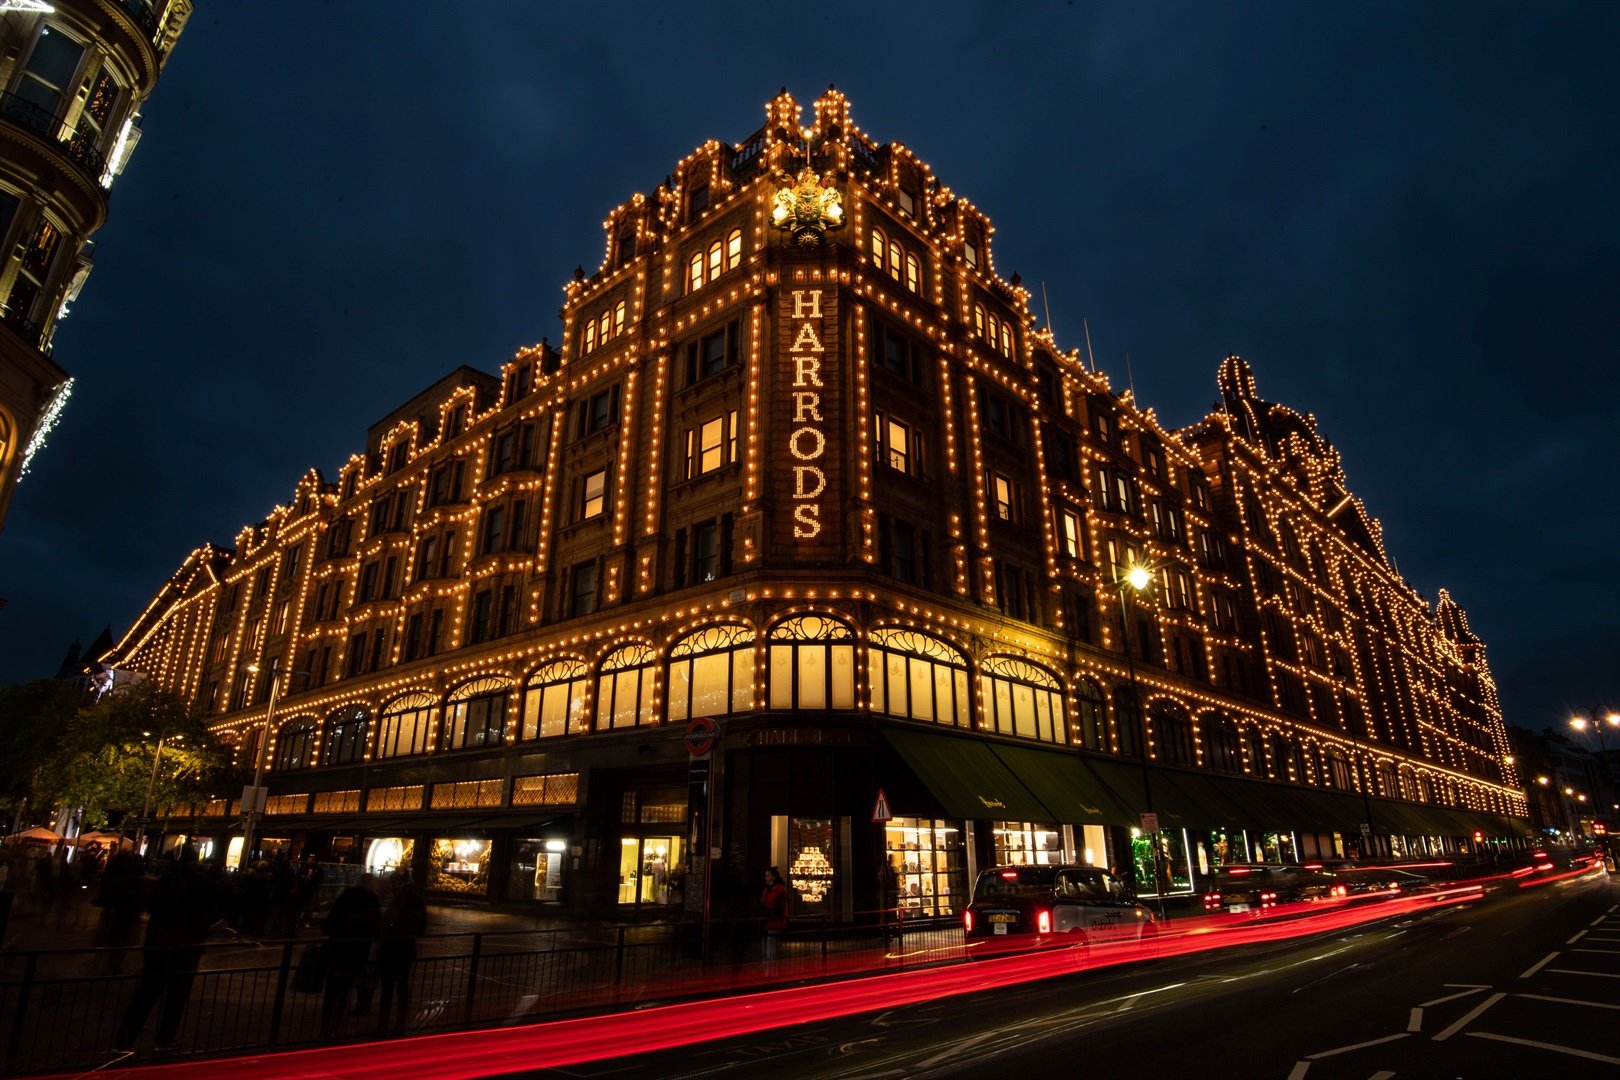 The luxury department store Harrods in London, England. Jeff Spicer/Getty Images.